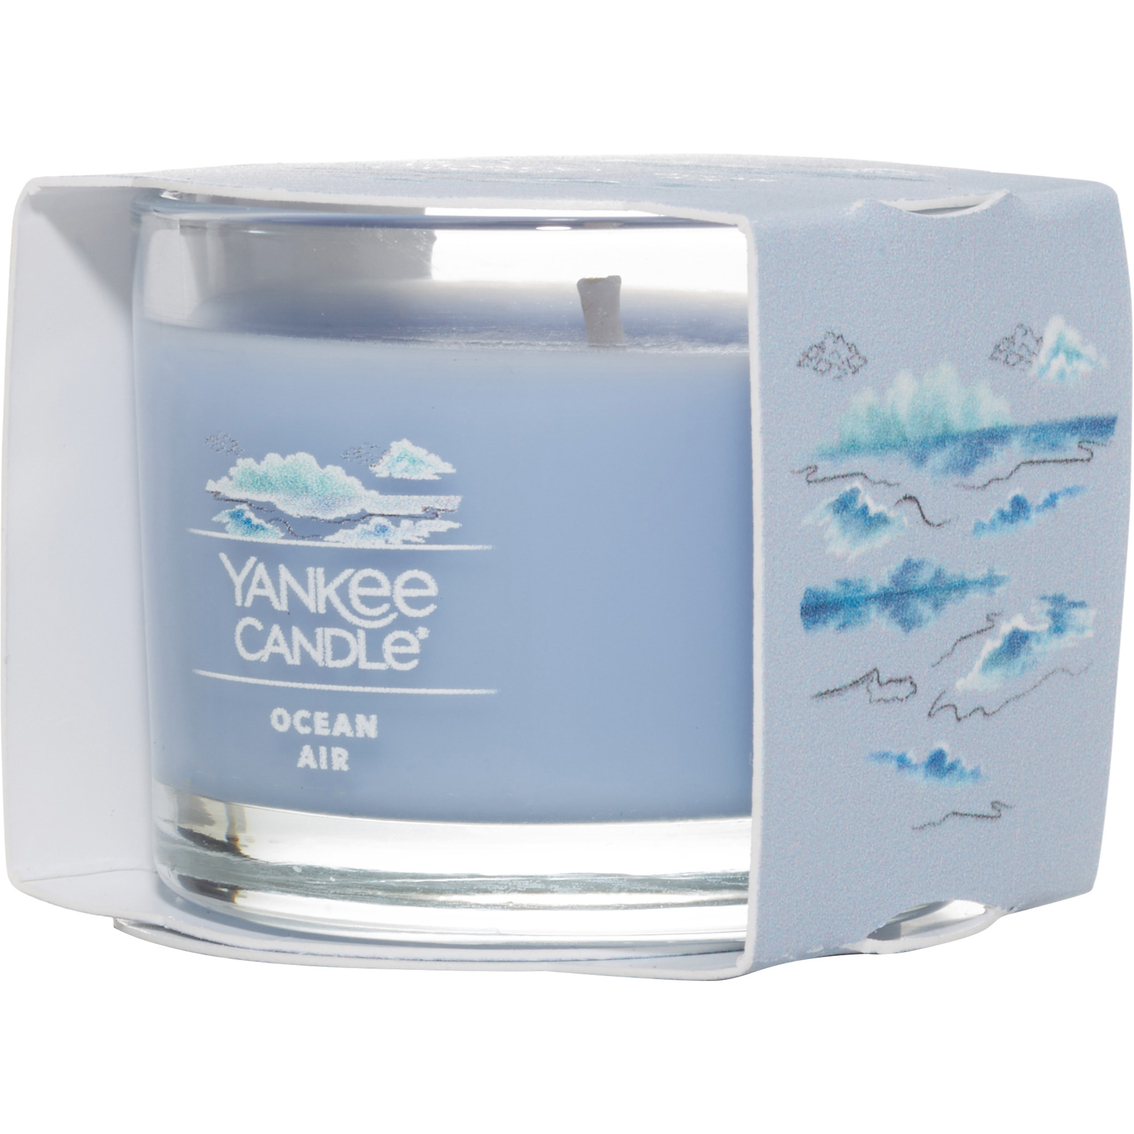 Yankee Candle Ocean Air Filled Votive Mini Candle